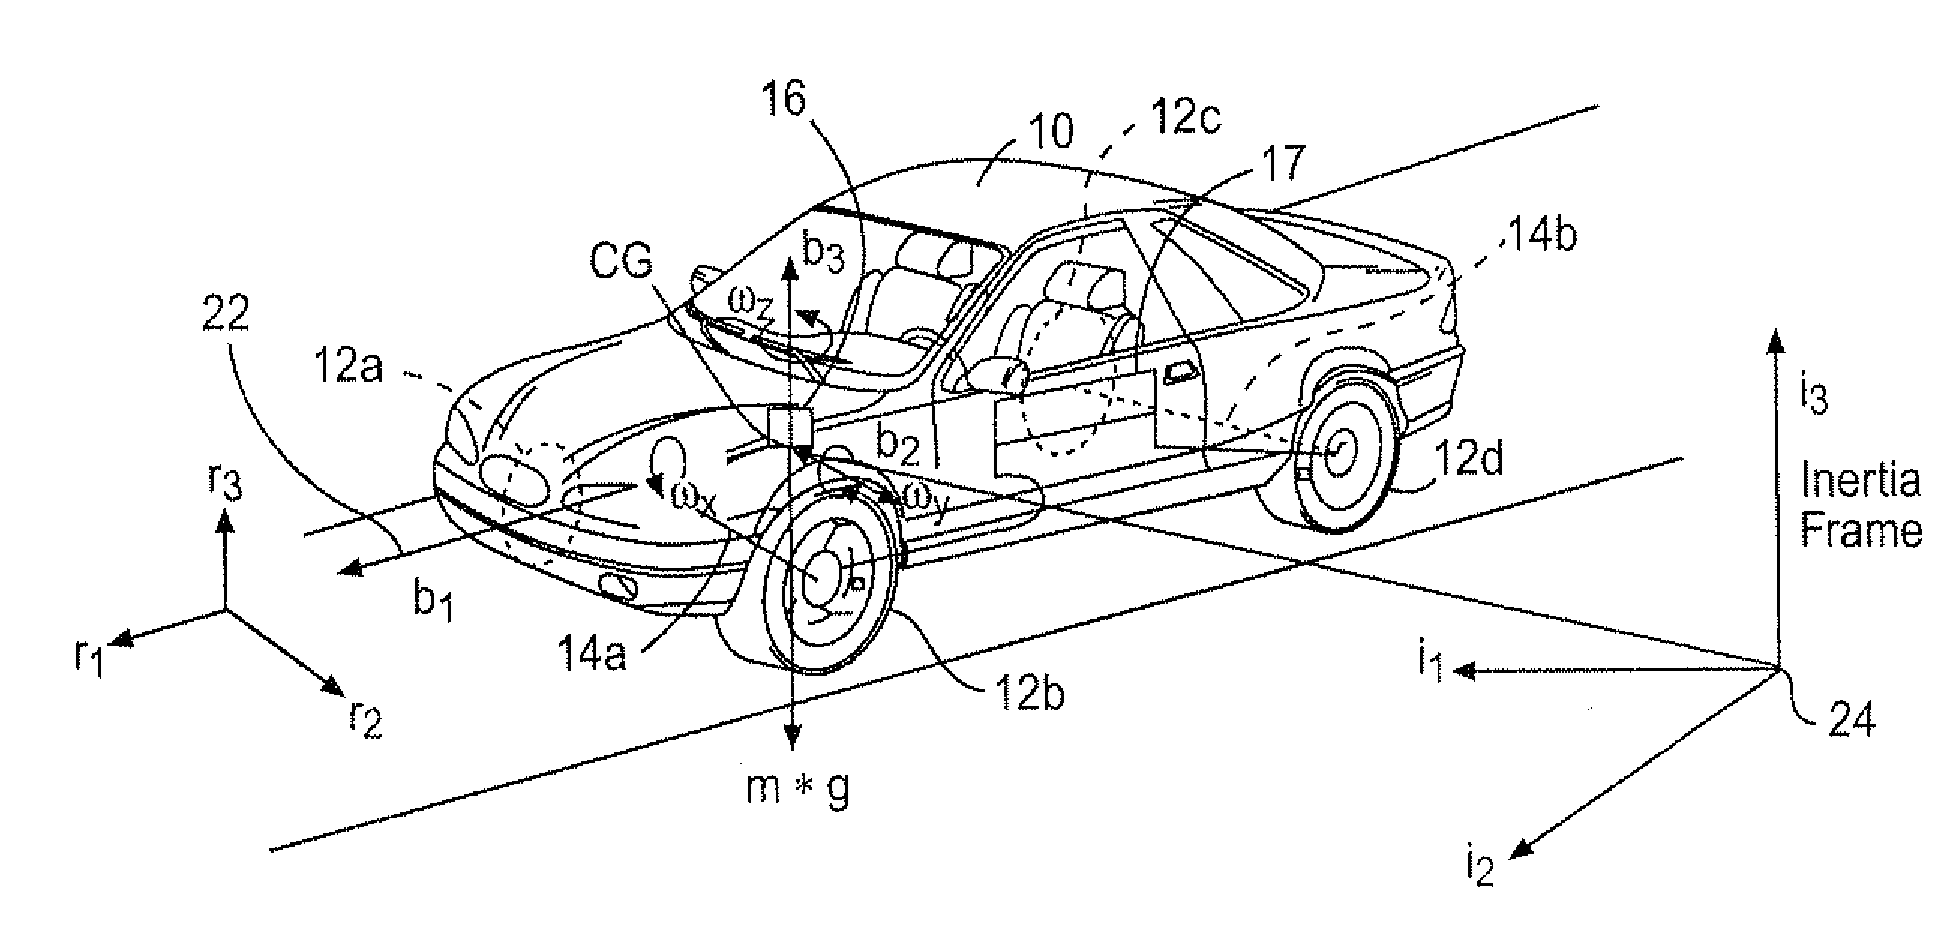 Vehicle Stability Control System With Tire Monitoring